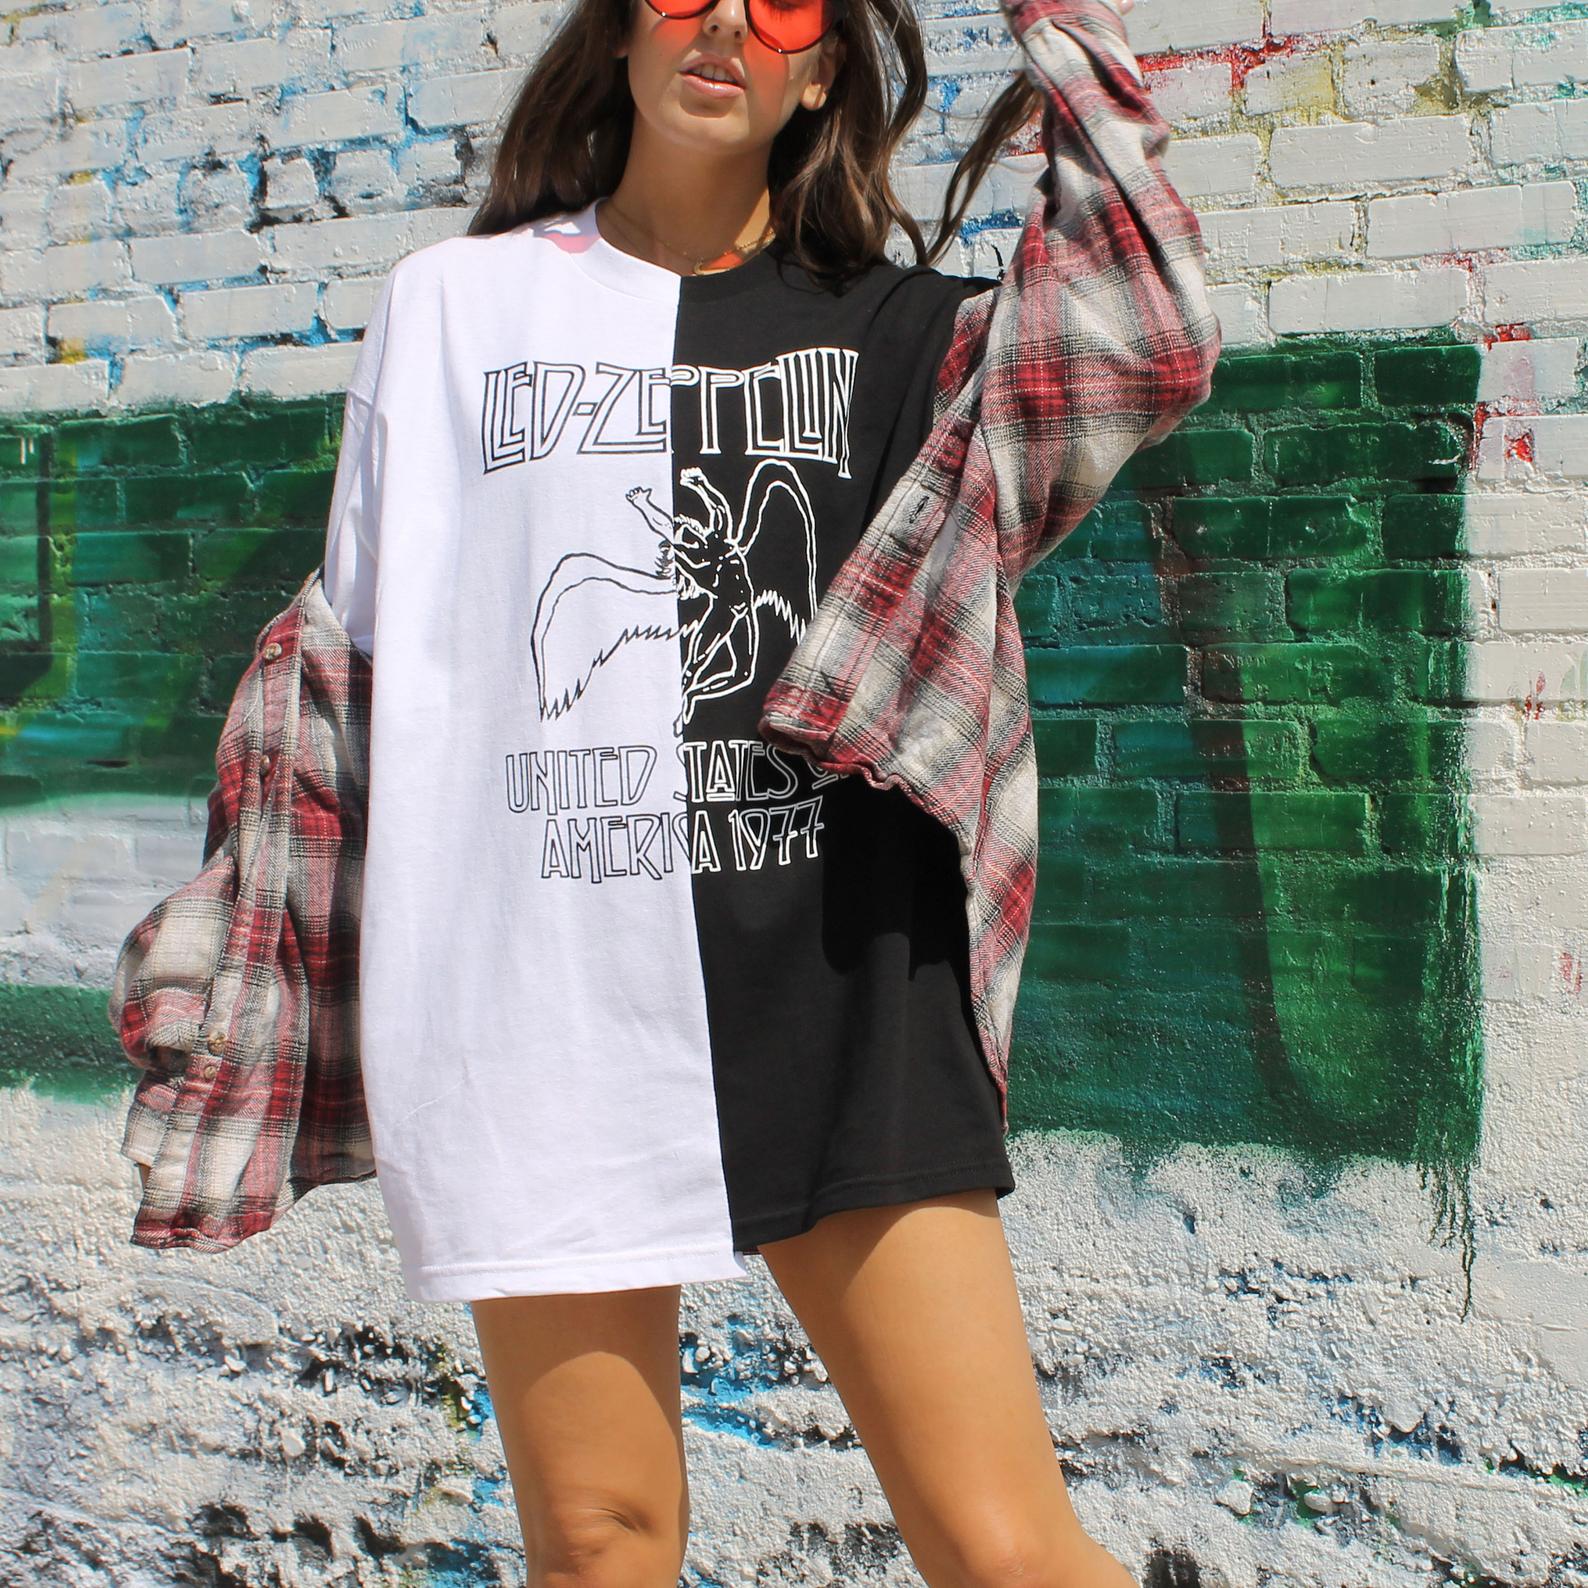 oversized t shirt dress outfit